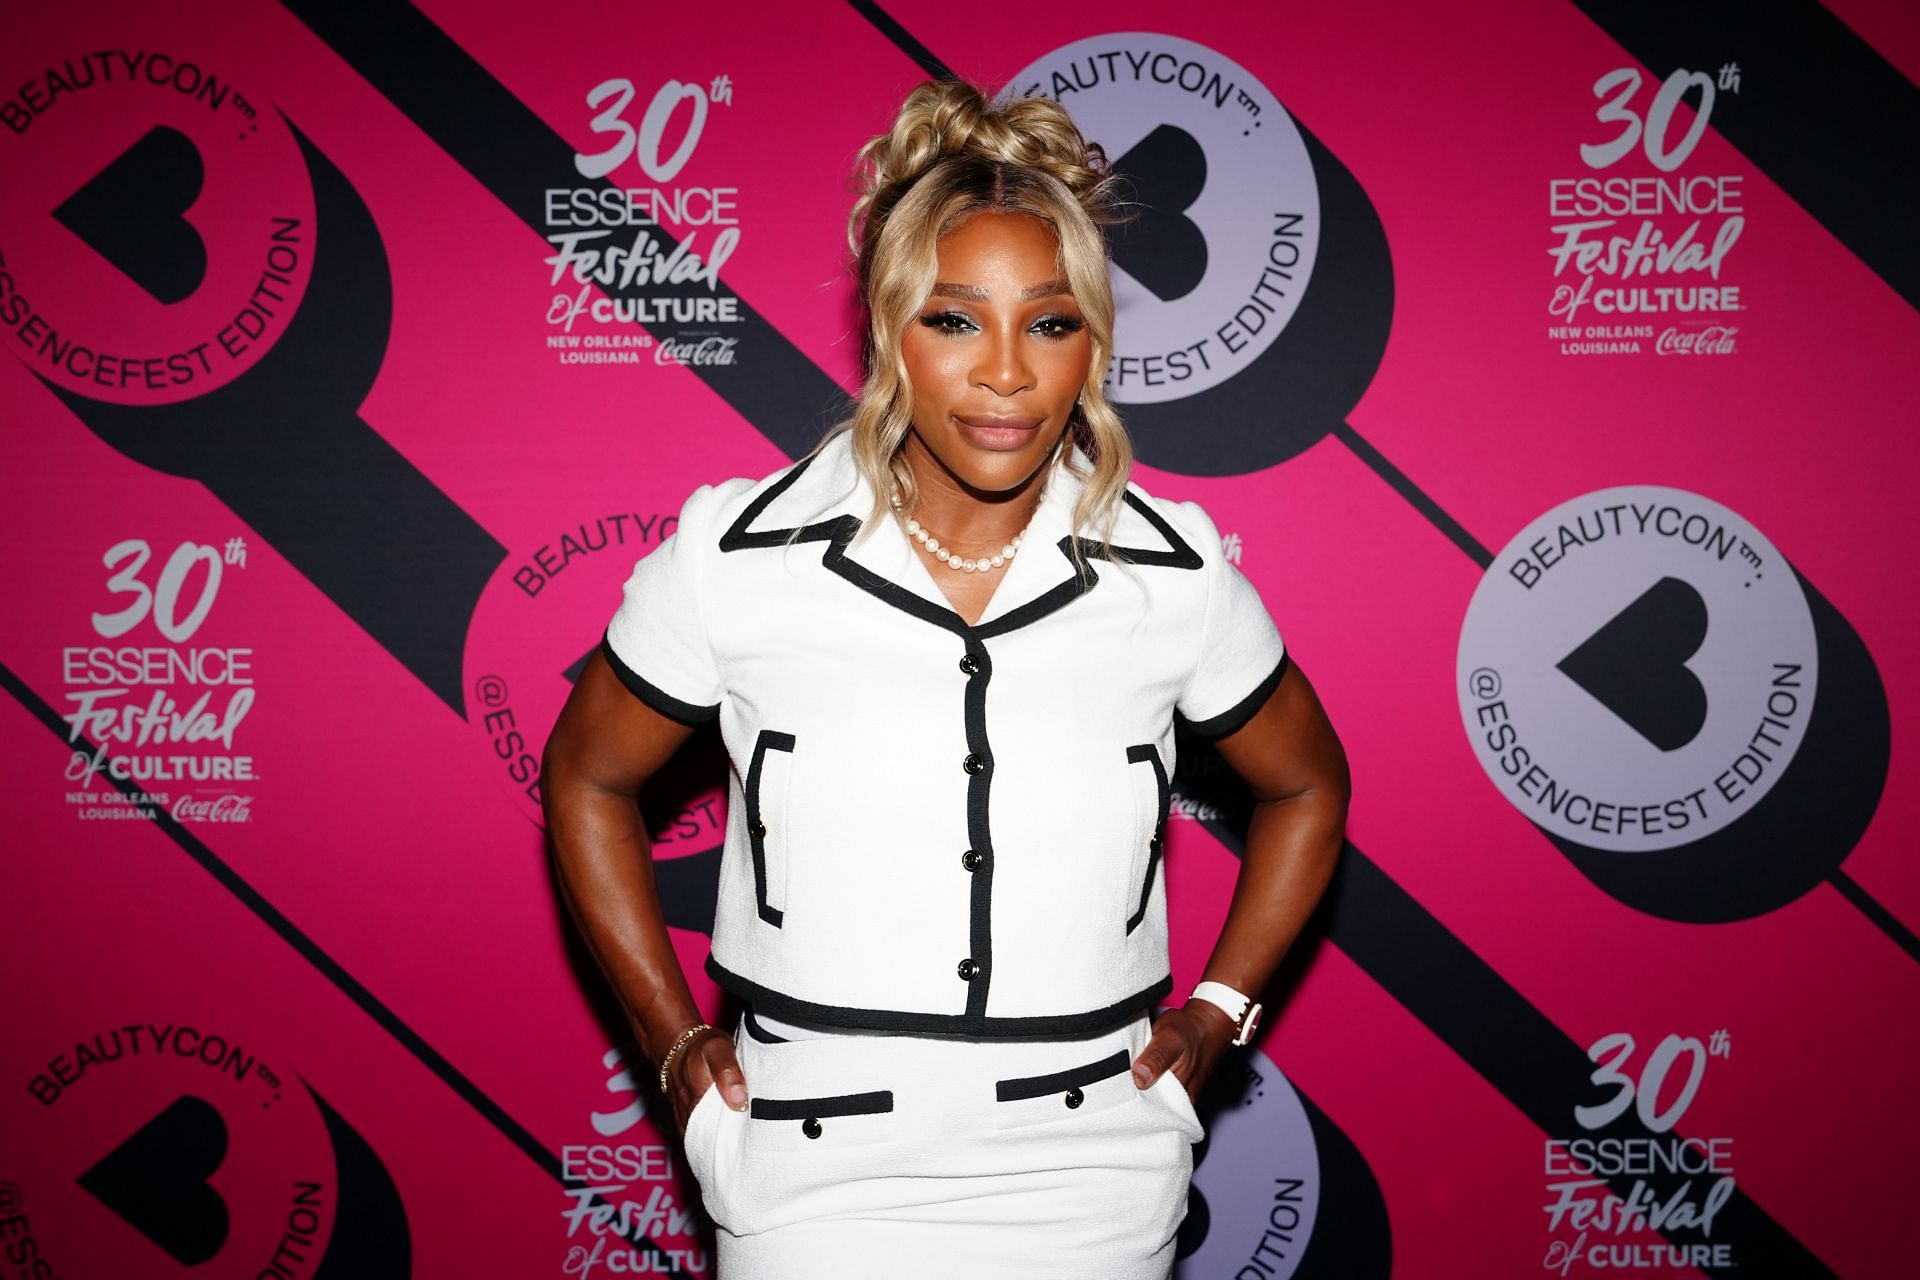 Serena Williams reflects on being unfairly treated in tennis: 